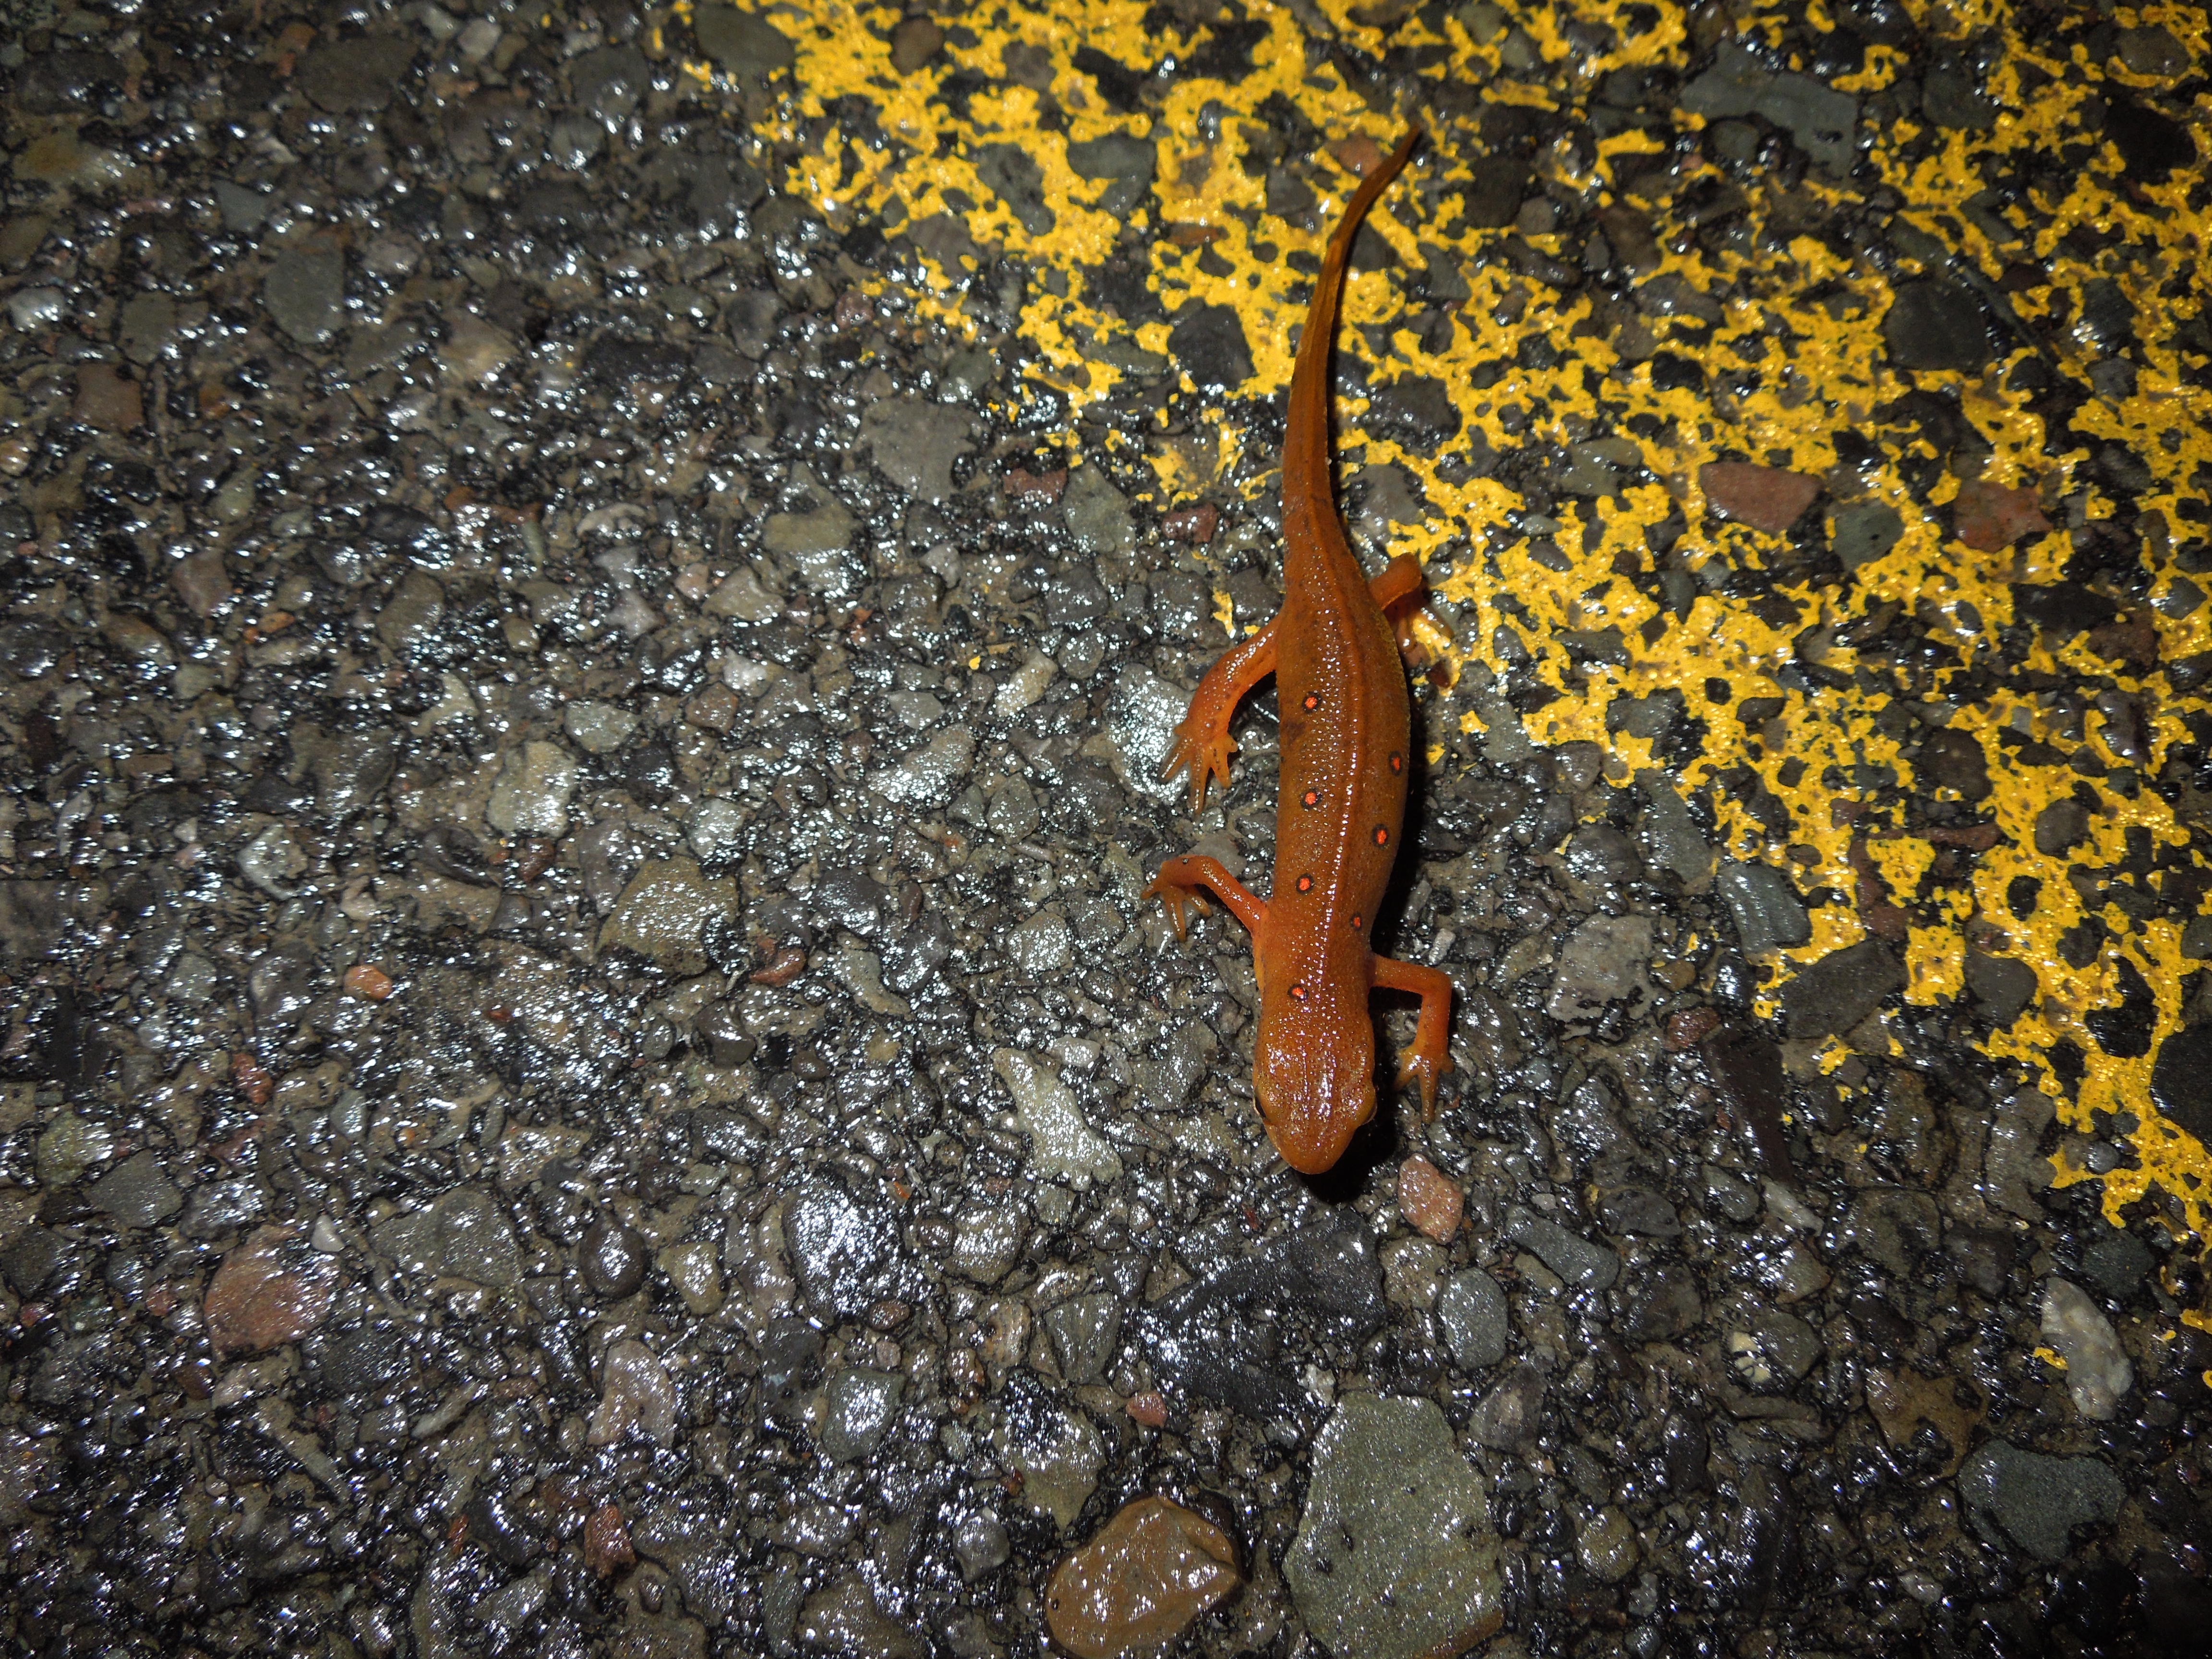 A red eft on the move